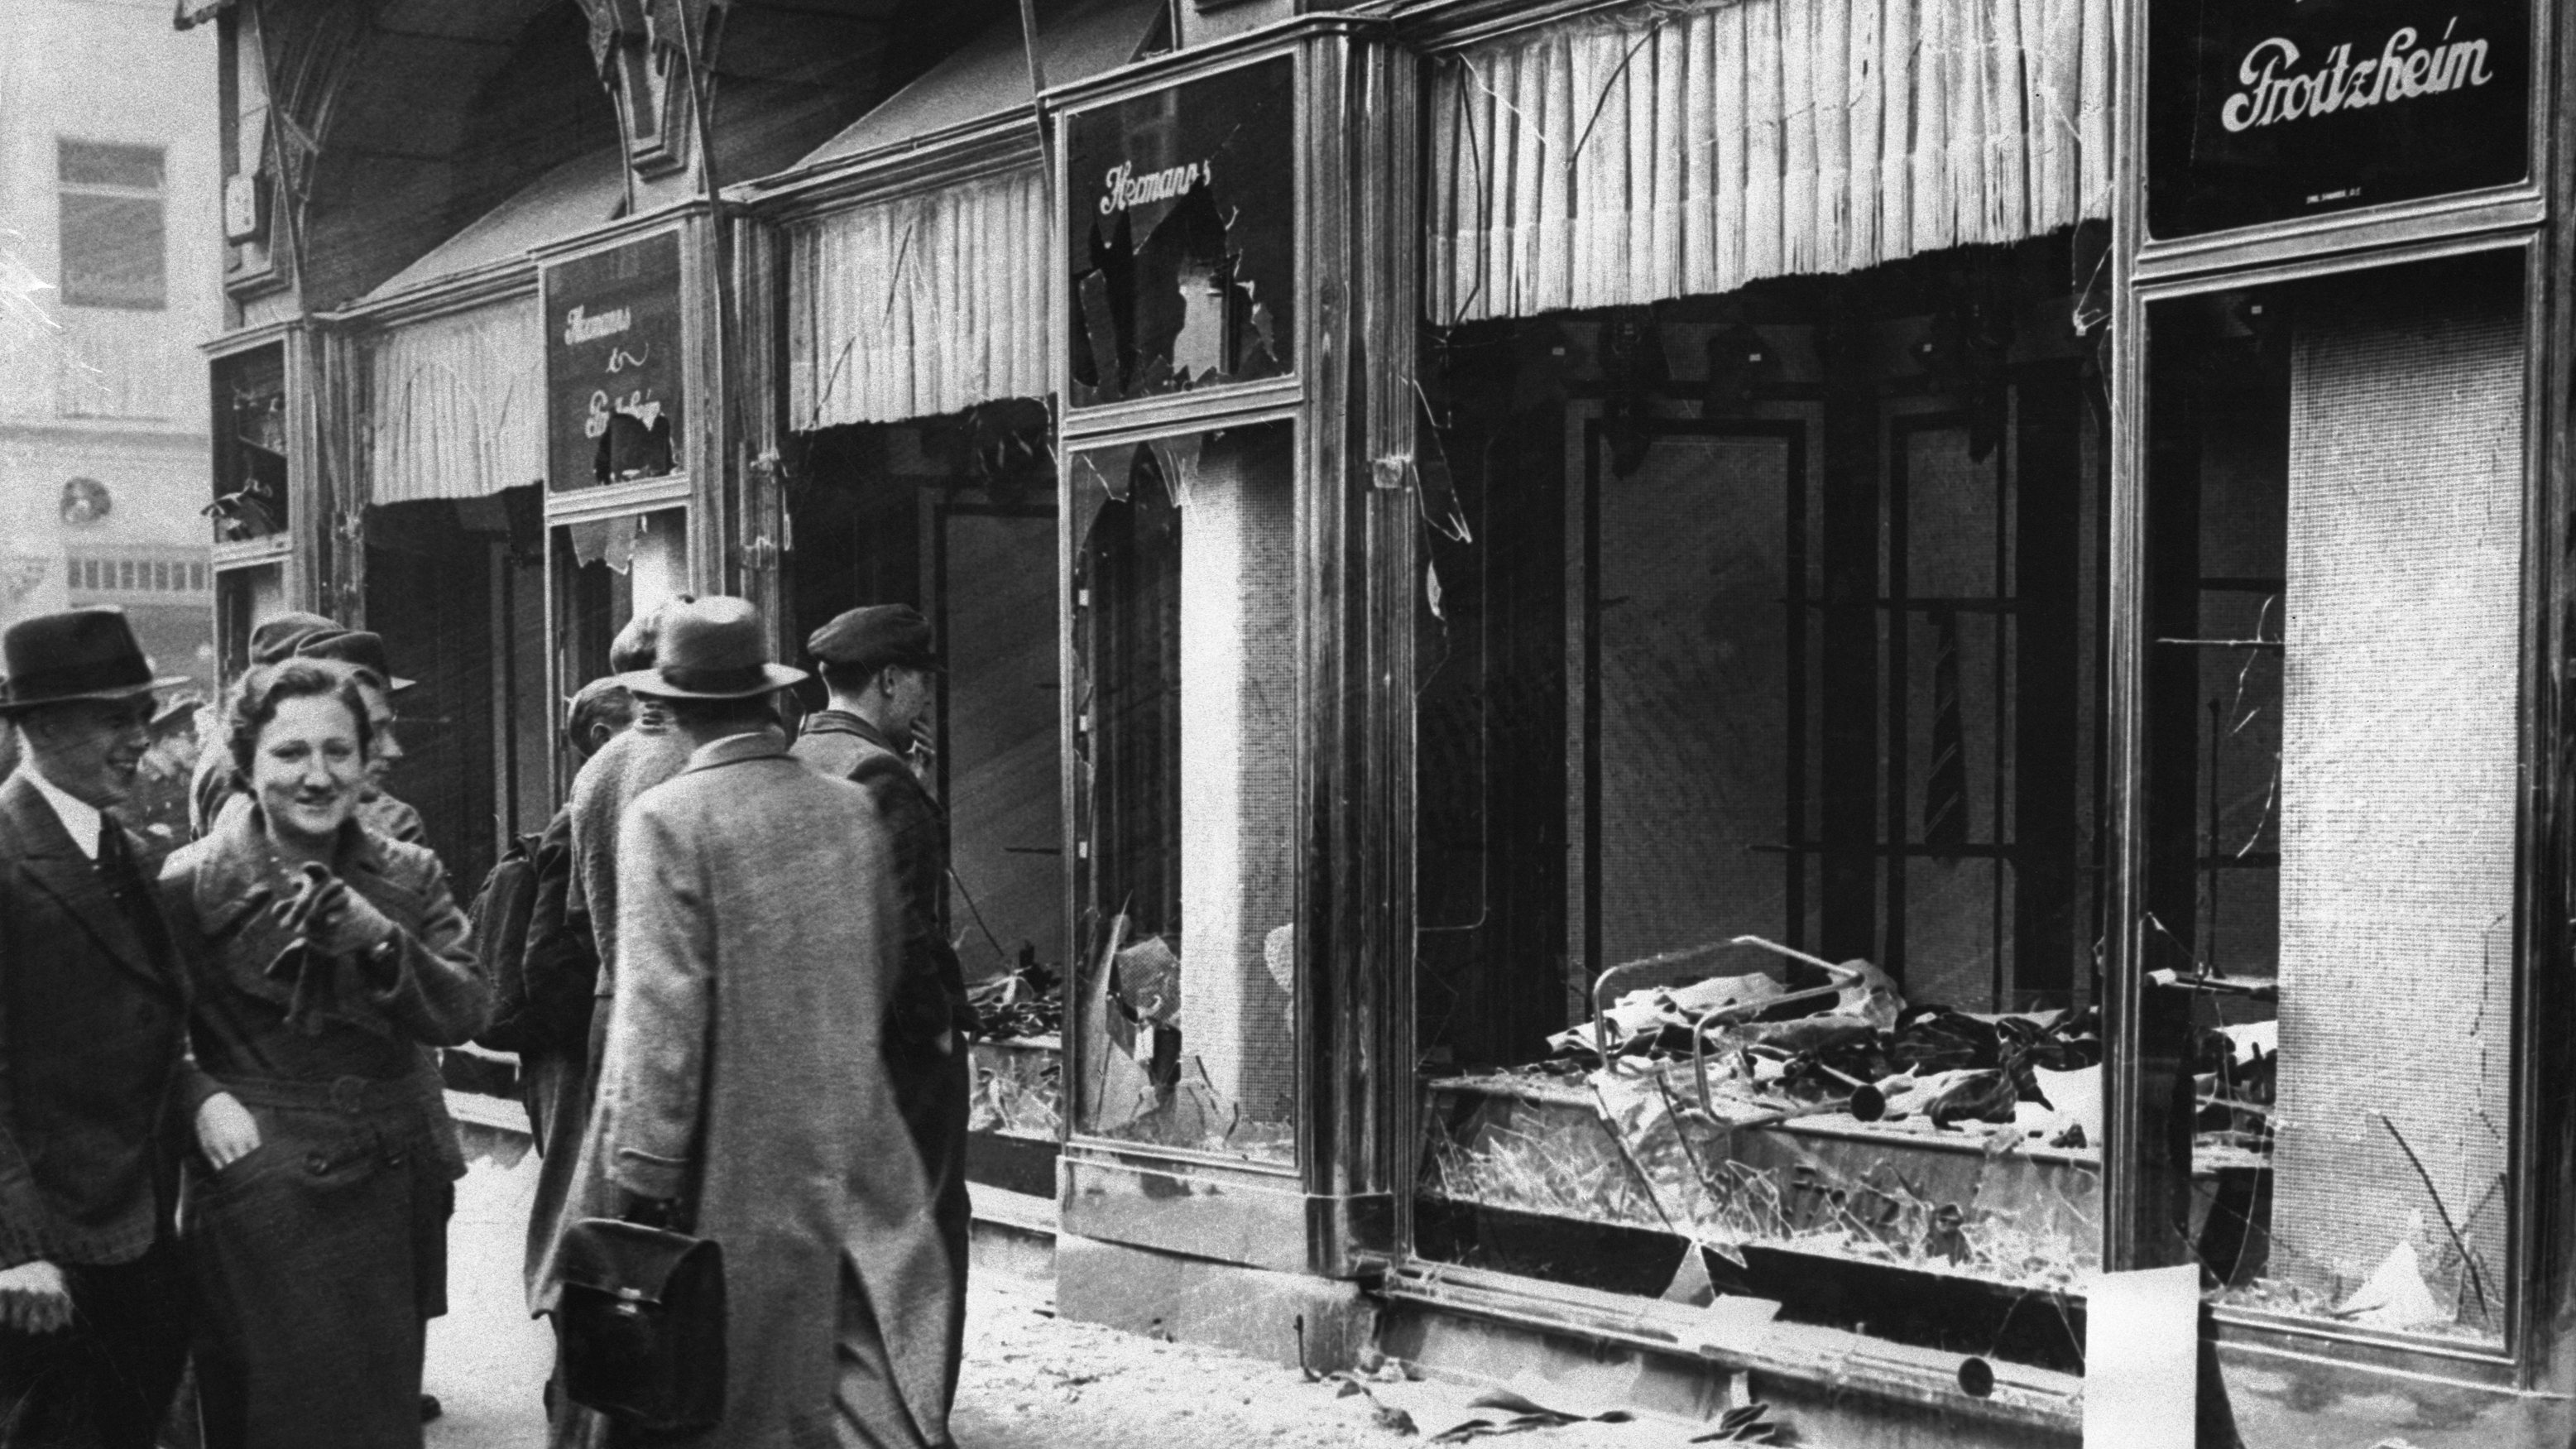 Damaged Jewish Owned Storefront after Kristallnacht Riot